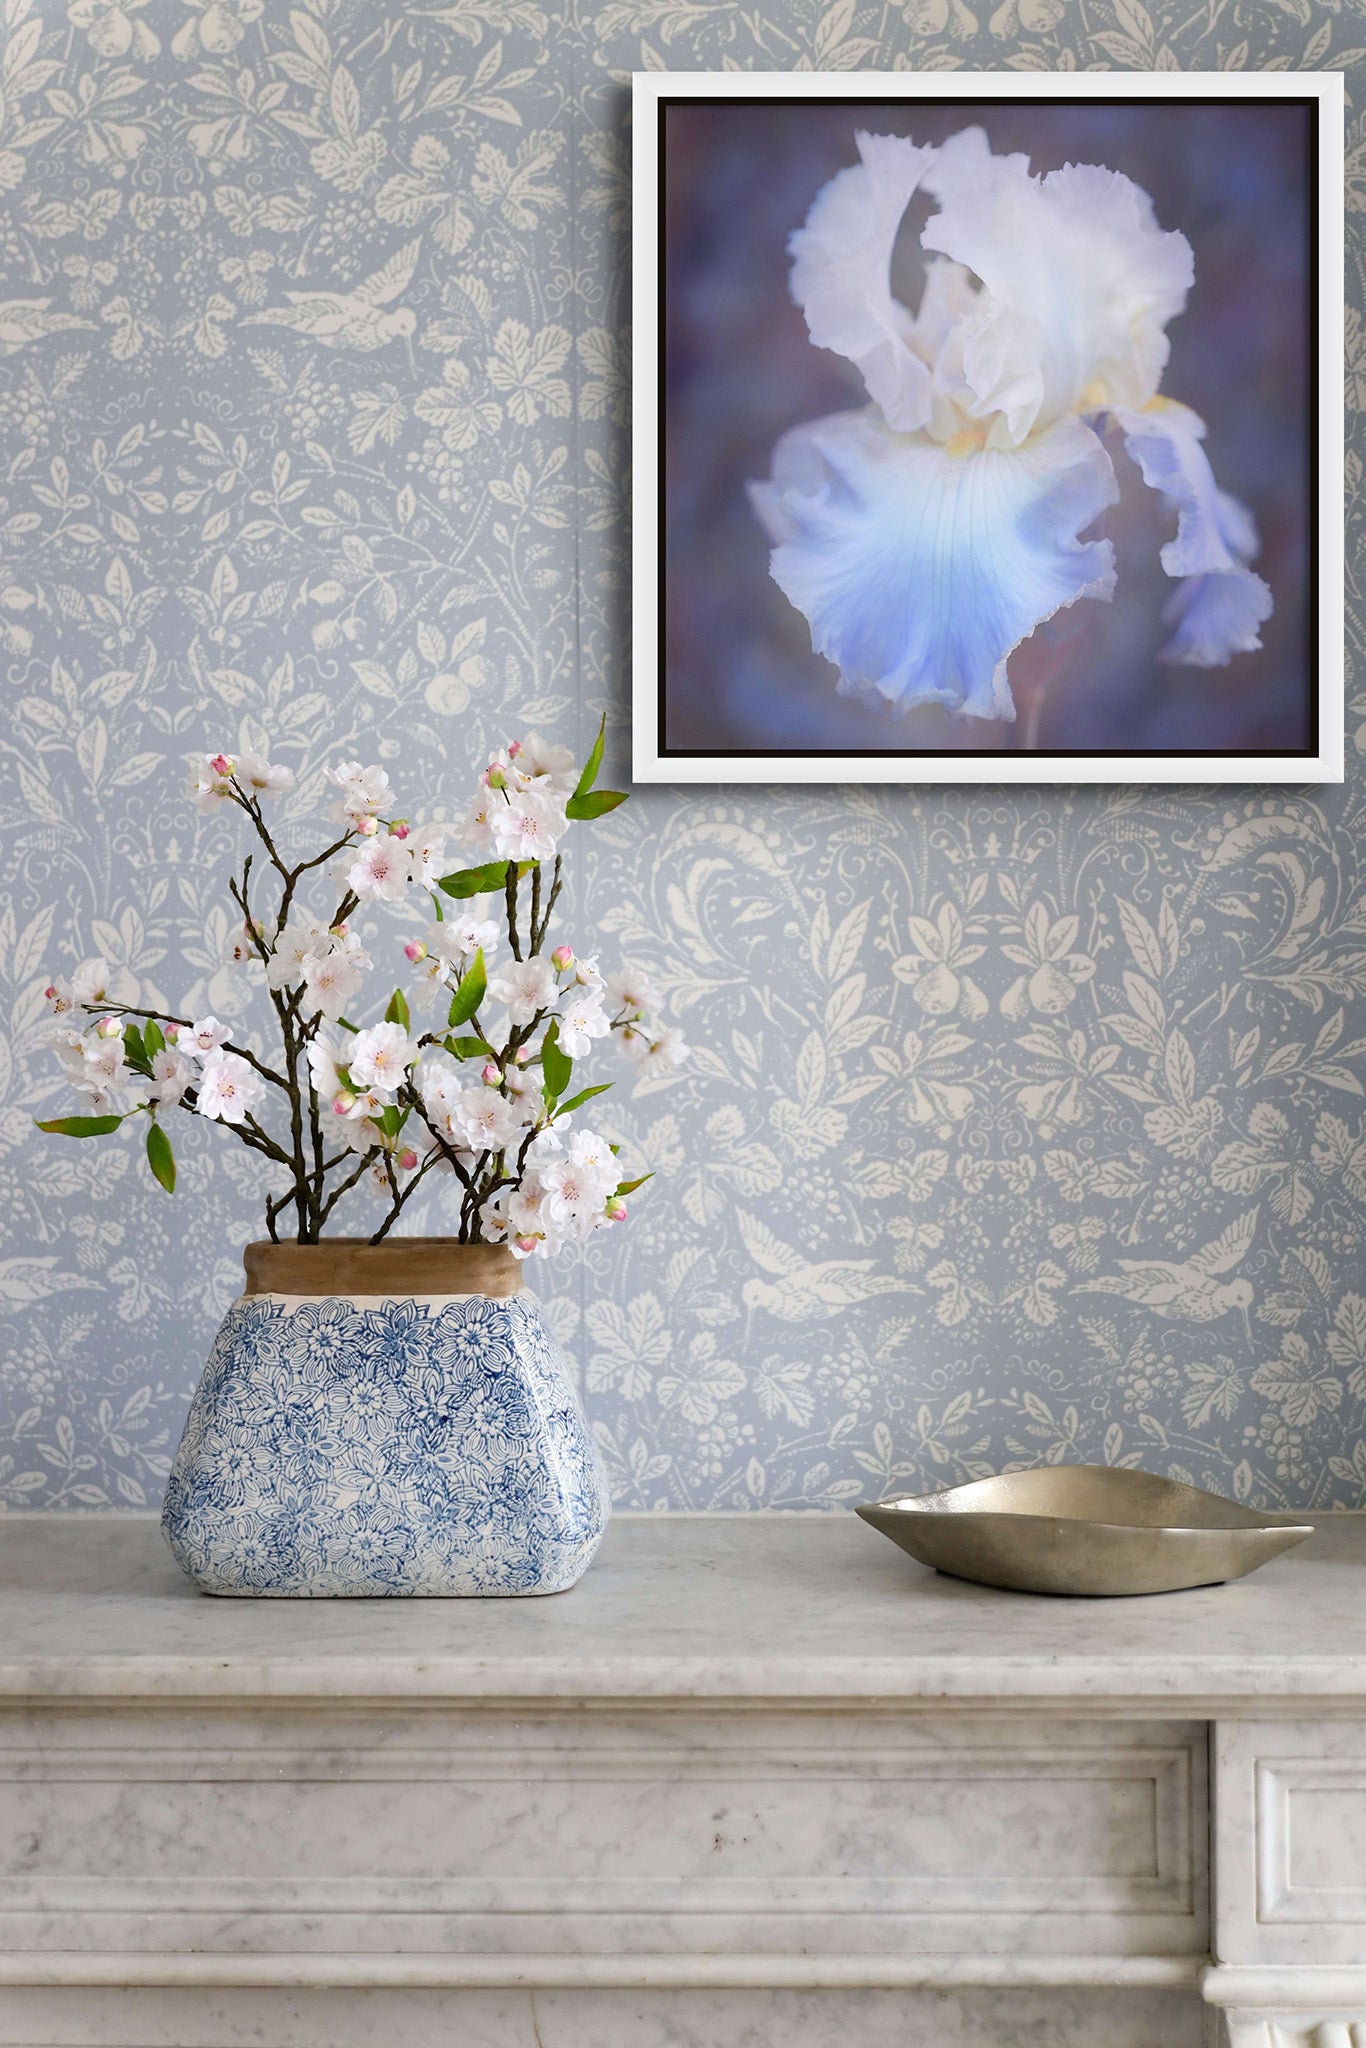 Picture hanging on the wall of a room. There is a counter with a bouquet of flowers. There is ornate wallpaper on the all. The picture is a blue and white dahlia photograph by Cameron Dreaux. 